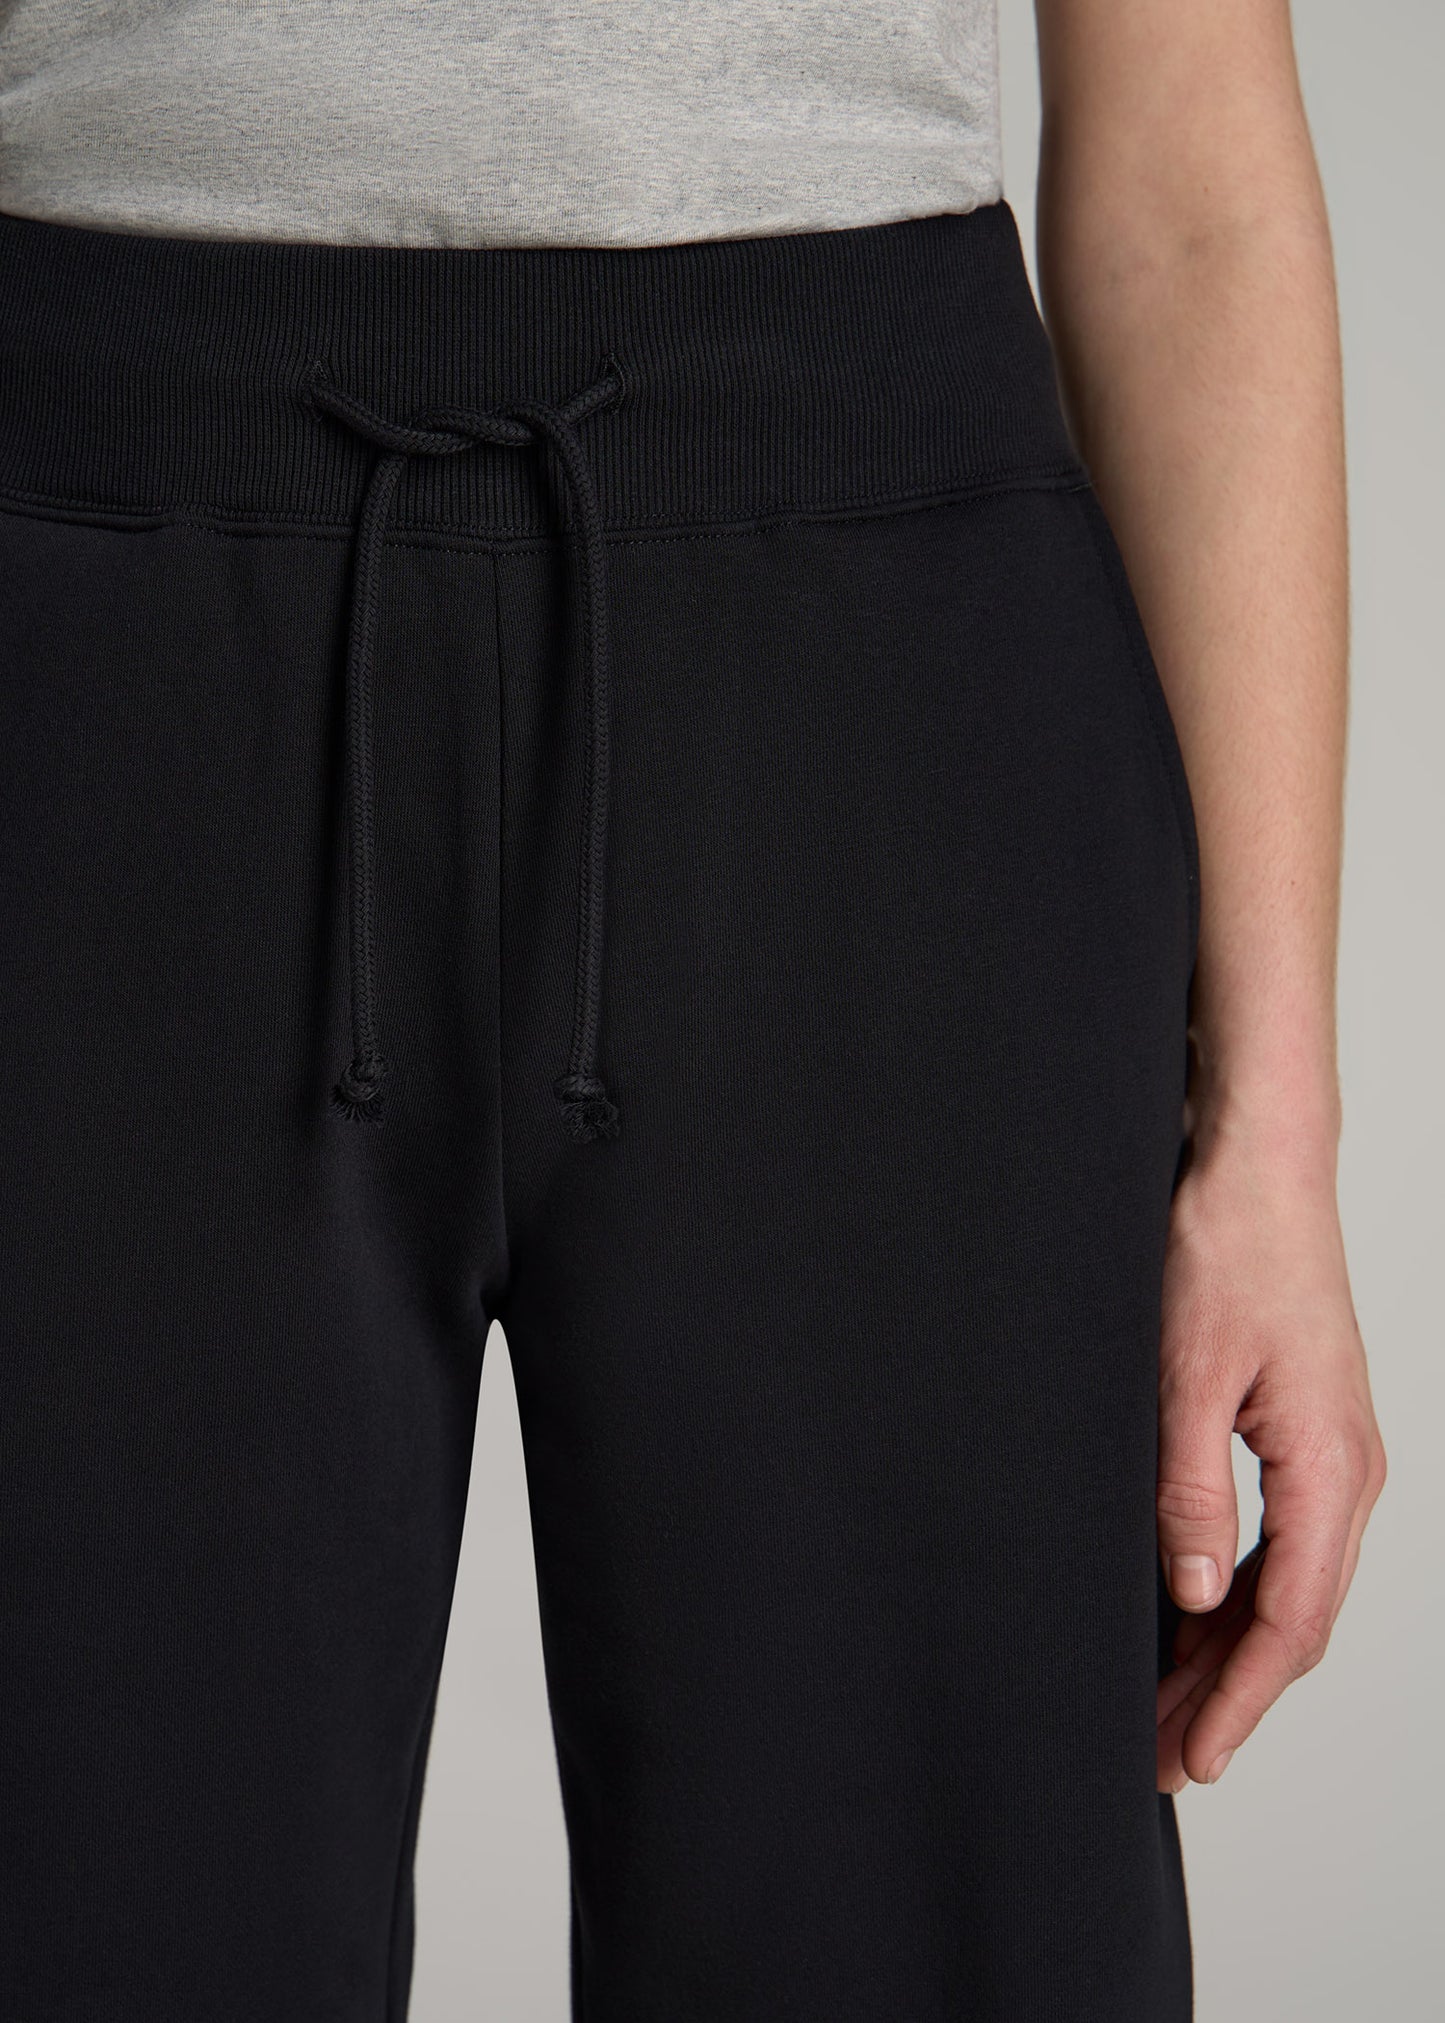 A.T. Basics Athletic Joggers for Tall Women in Black